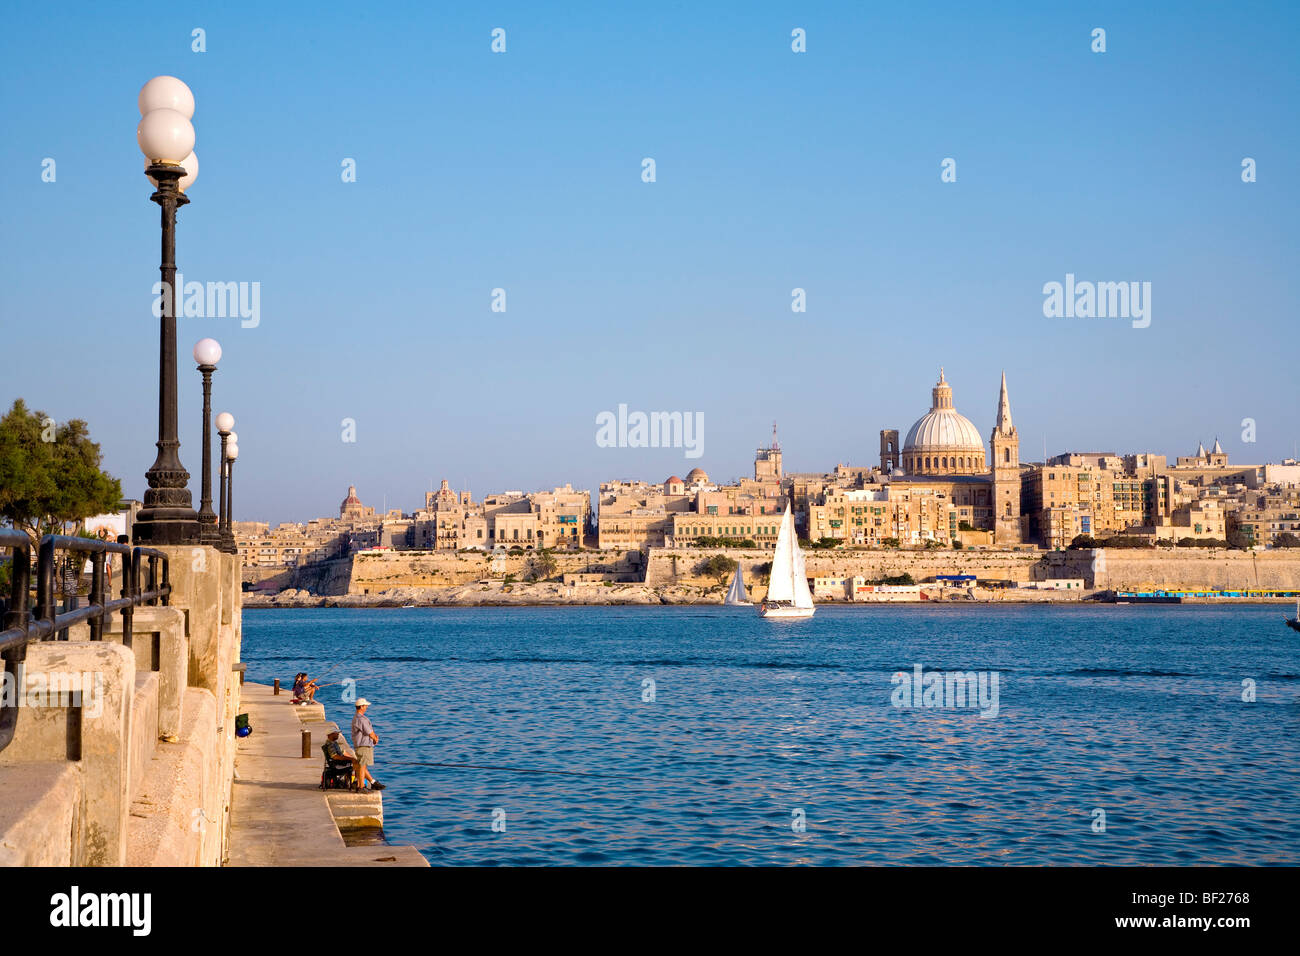 People at the promenade of Sliema with view at the town Valletta, Malta, Europe Stock Photo